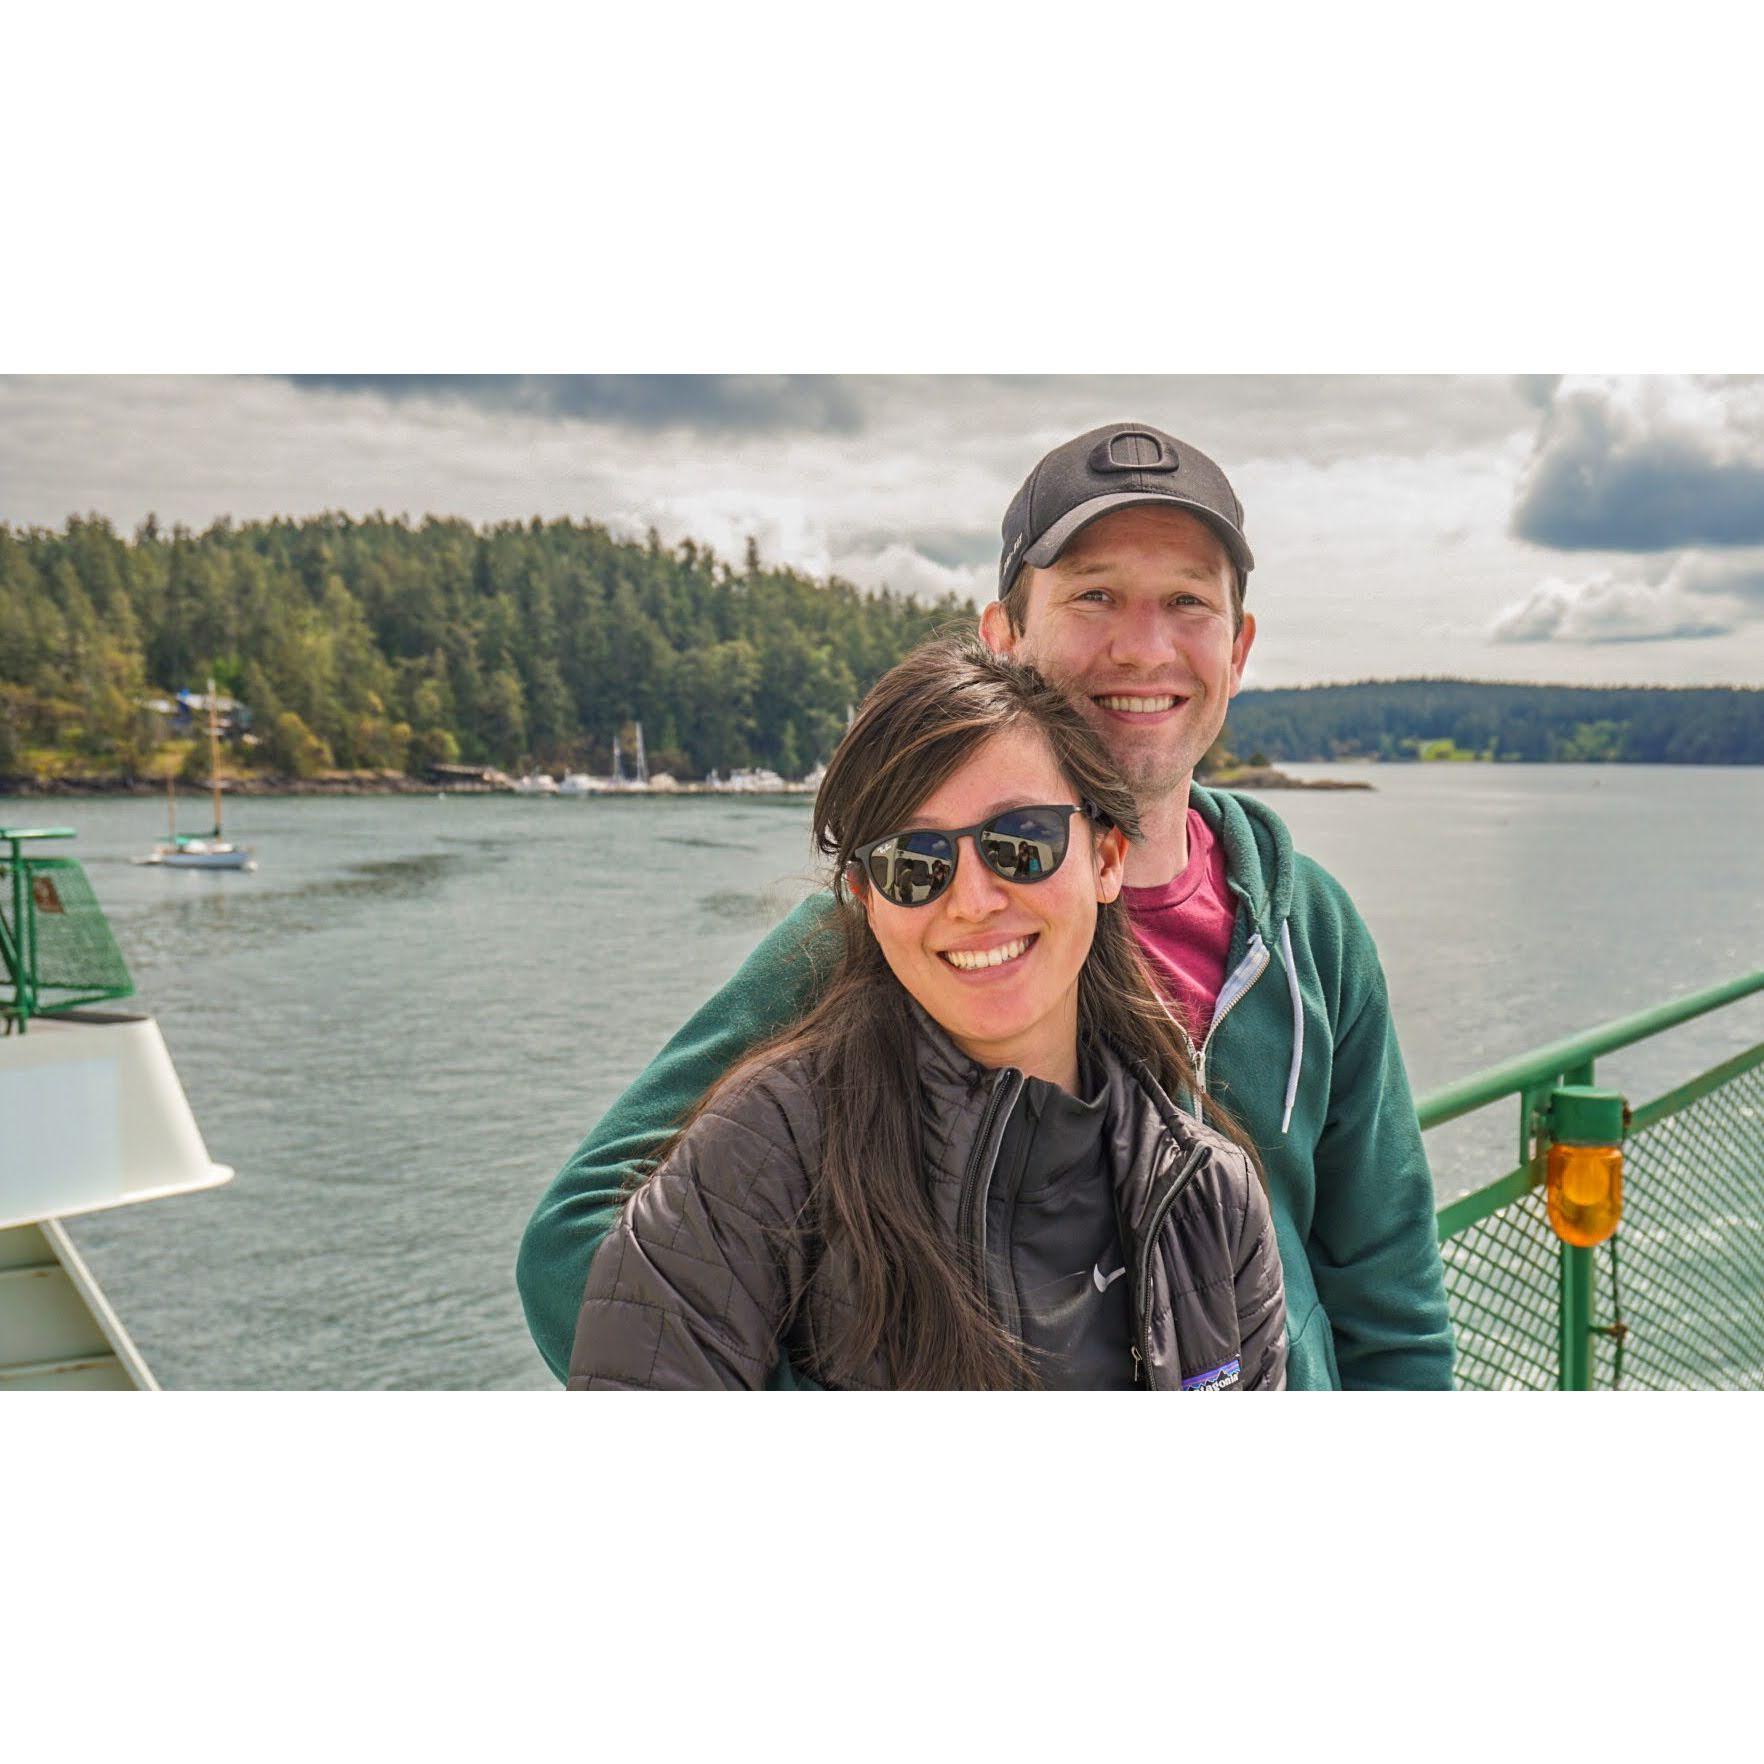 Ferry ride to Orcas Island